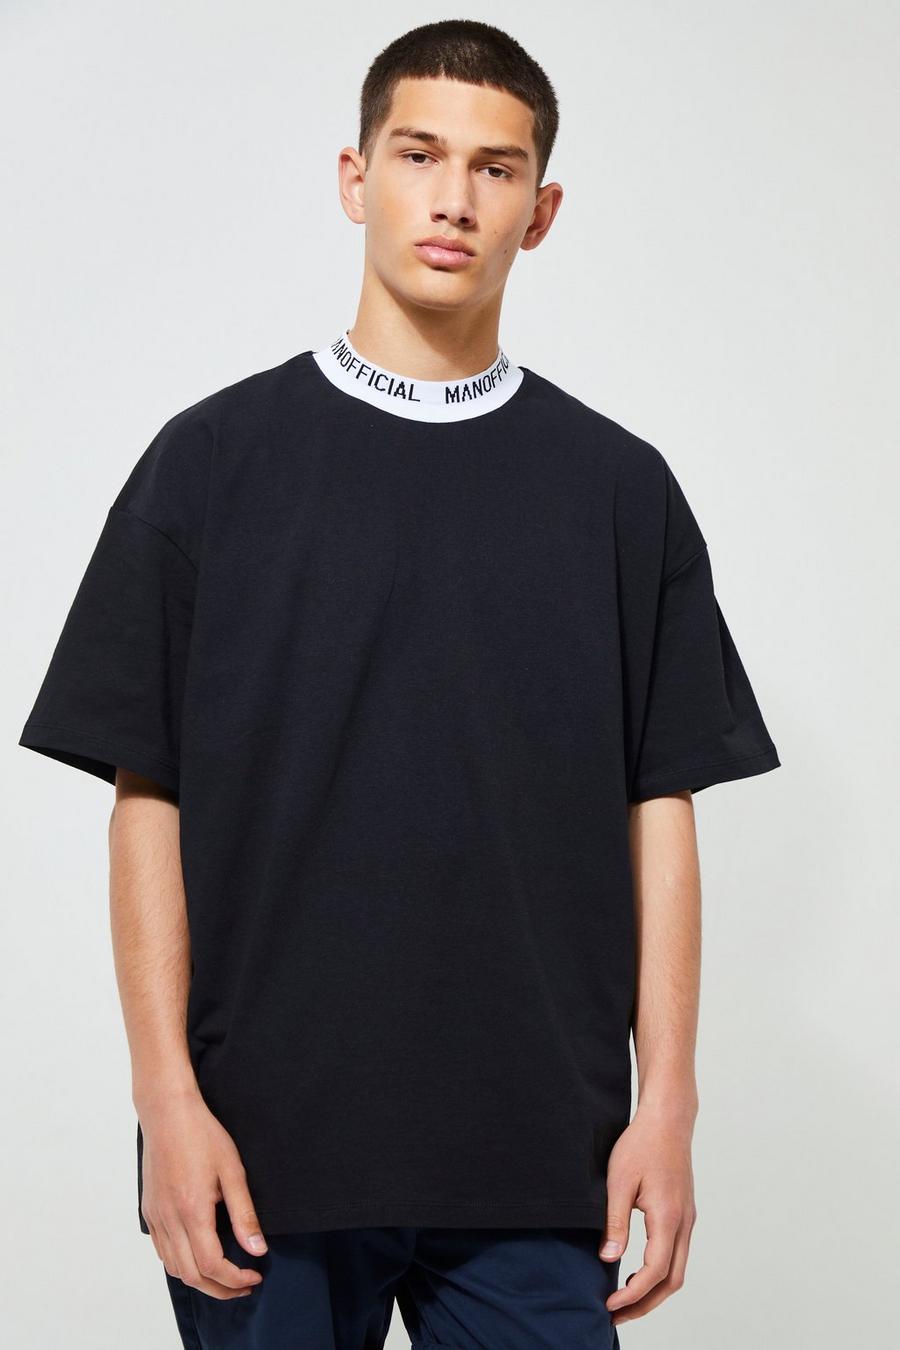 Black Oversized Official Man Rib T-shirt  image number 1